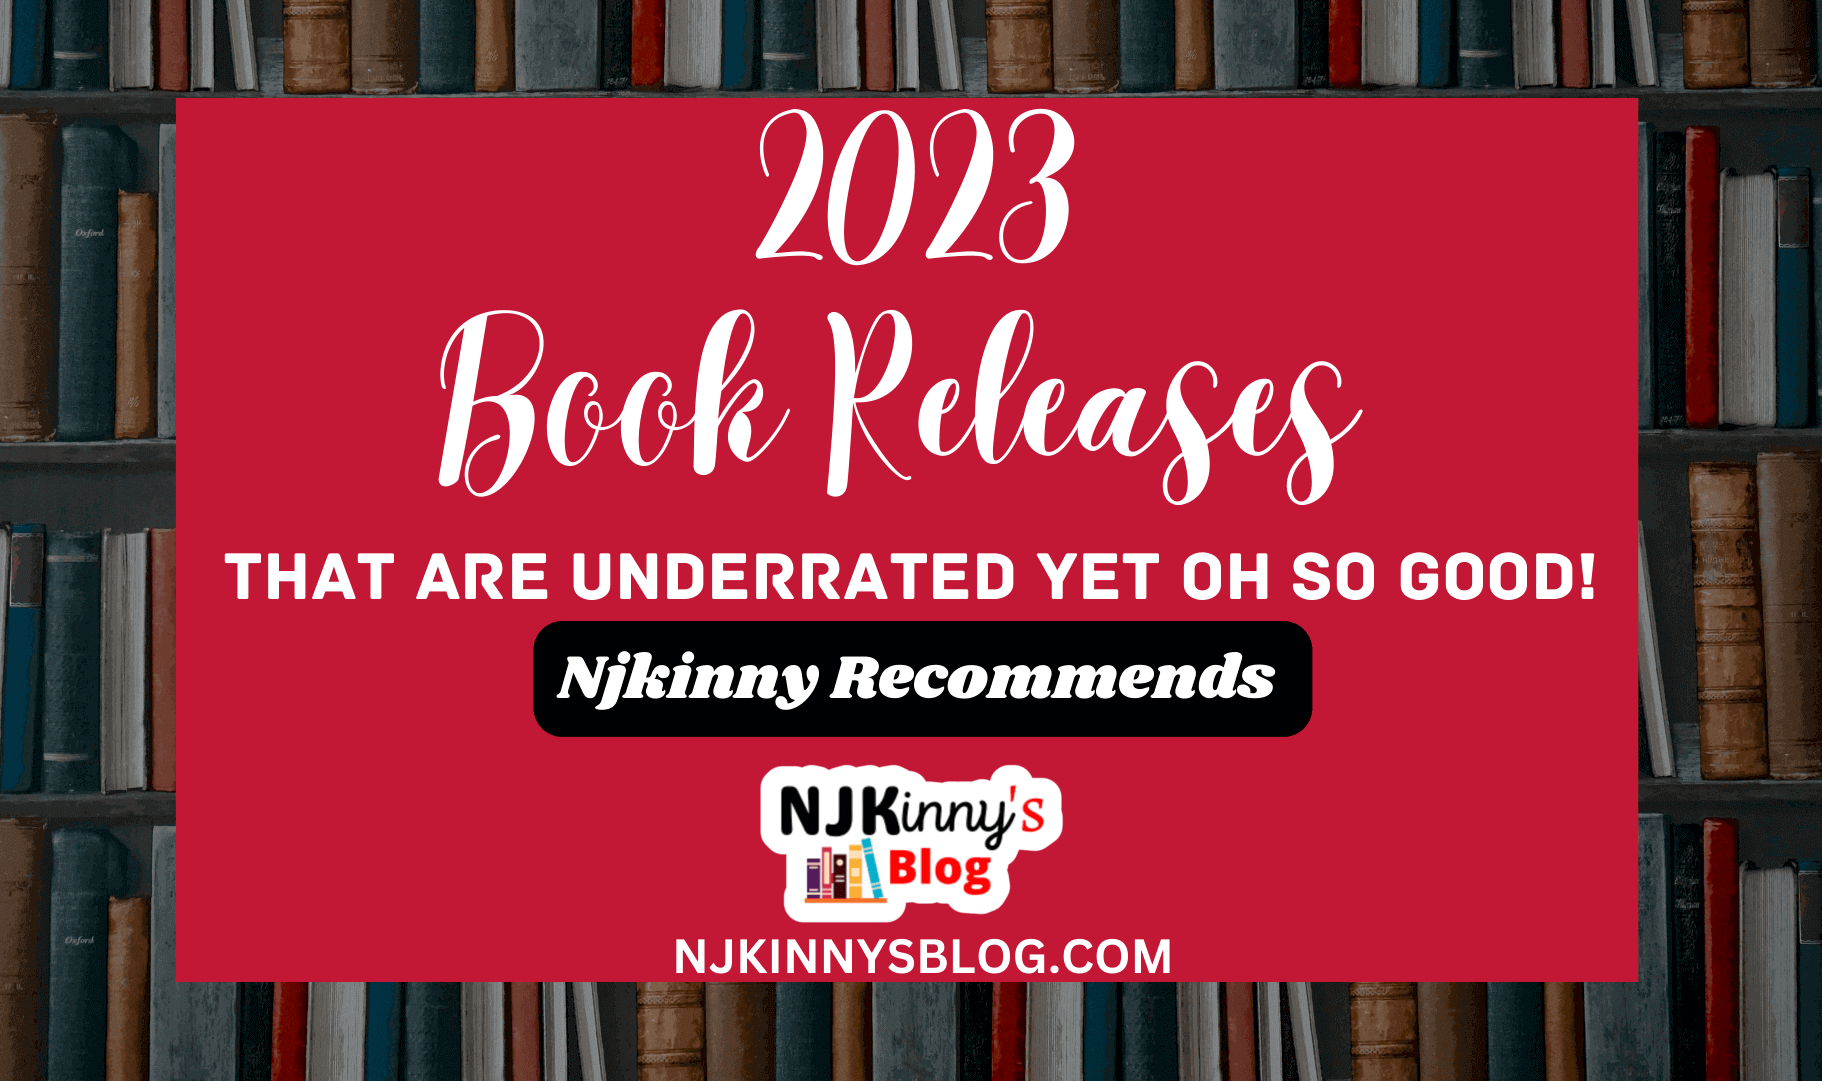 Top Underrated 2023 Book Releases that Njkinny Recommends! | Best 2023 Books